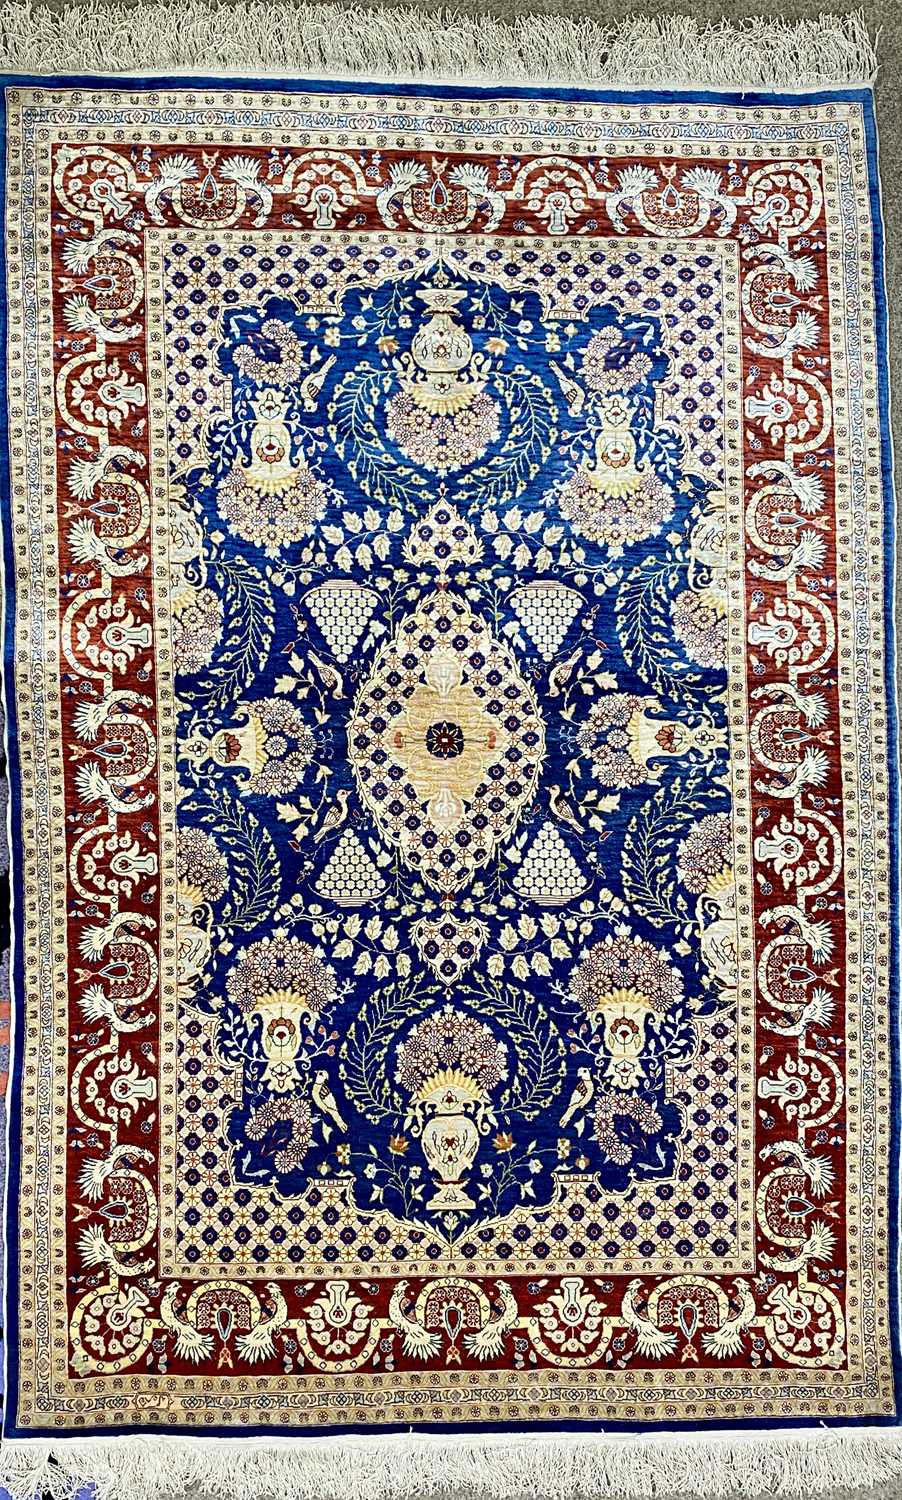 TURKISH HAND MADE SILK CARPET, blue, red and cream ground, centre field with oval medallion, birds